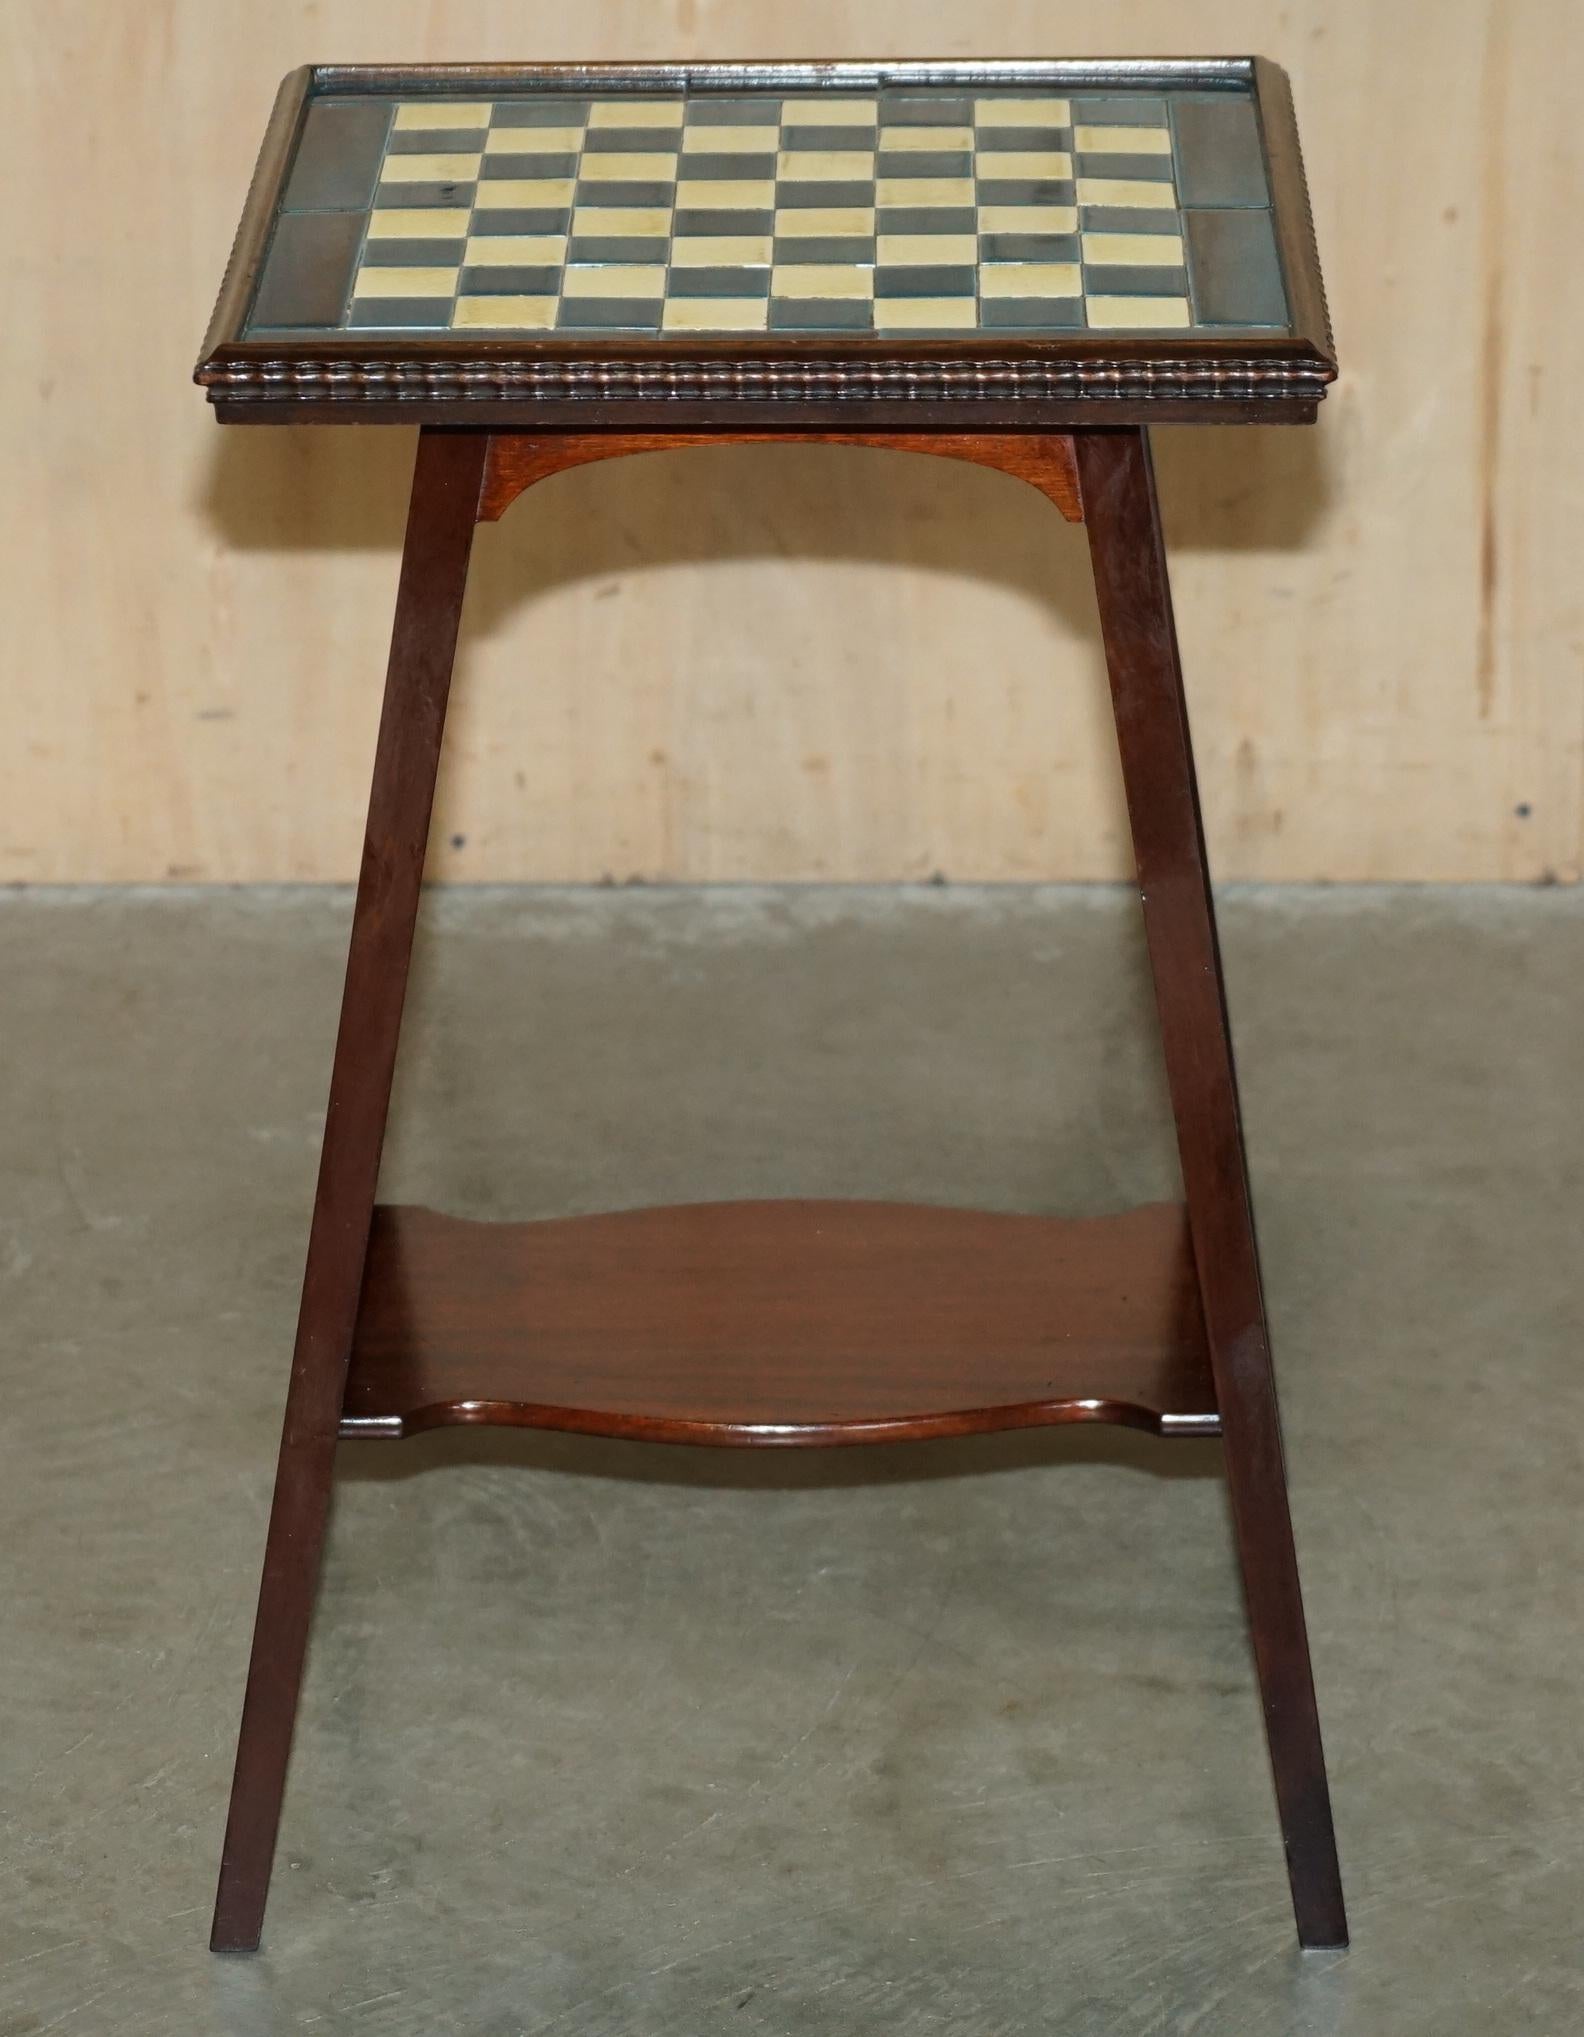 ANTIQUE VICTORIAN AESTHETIC MOVEMENT STYLE TiLED TOP CHESSBOARD CHESS TABLE For Sale 4